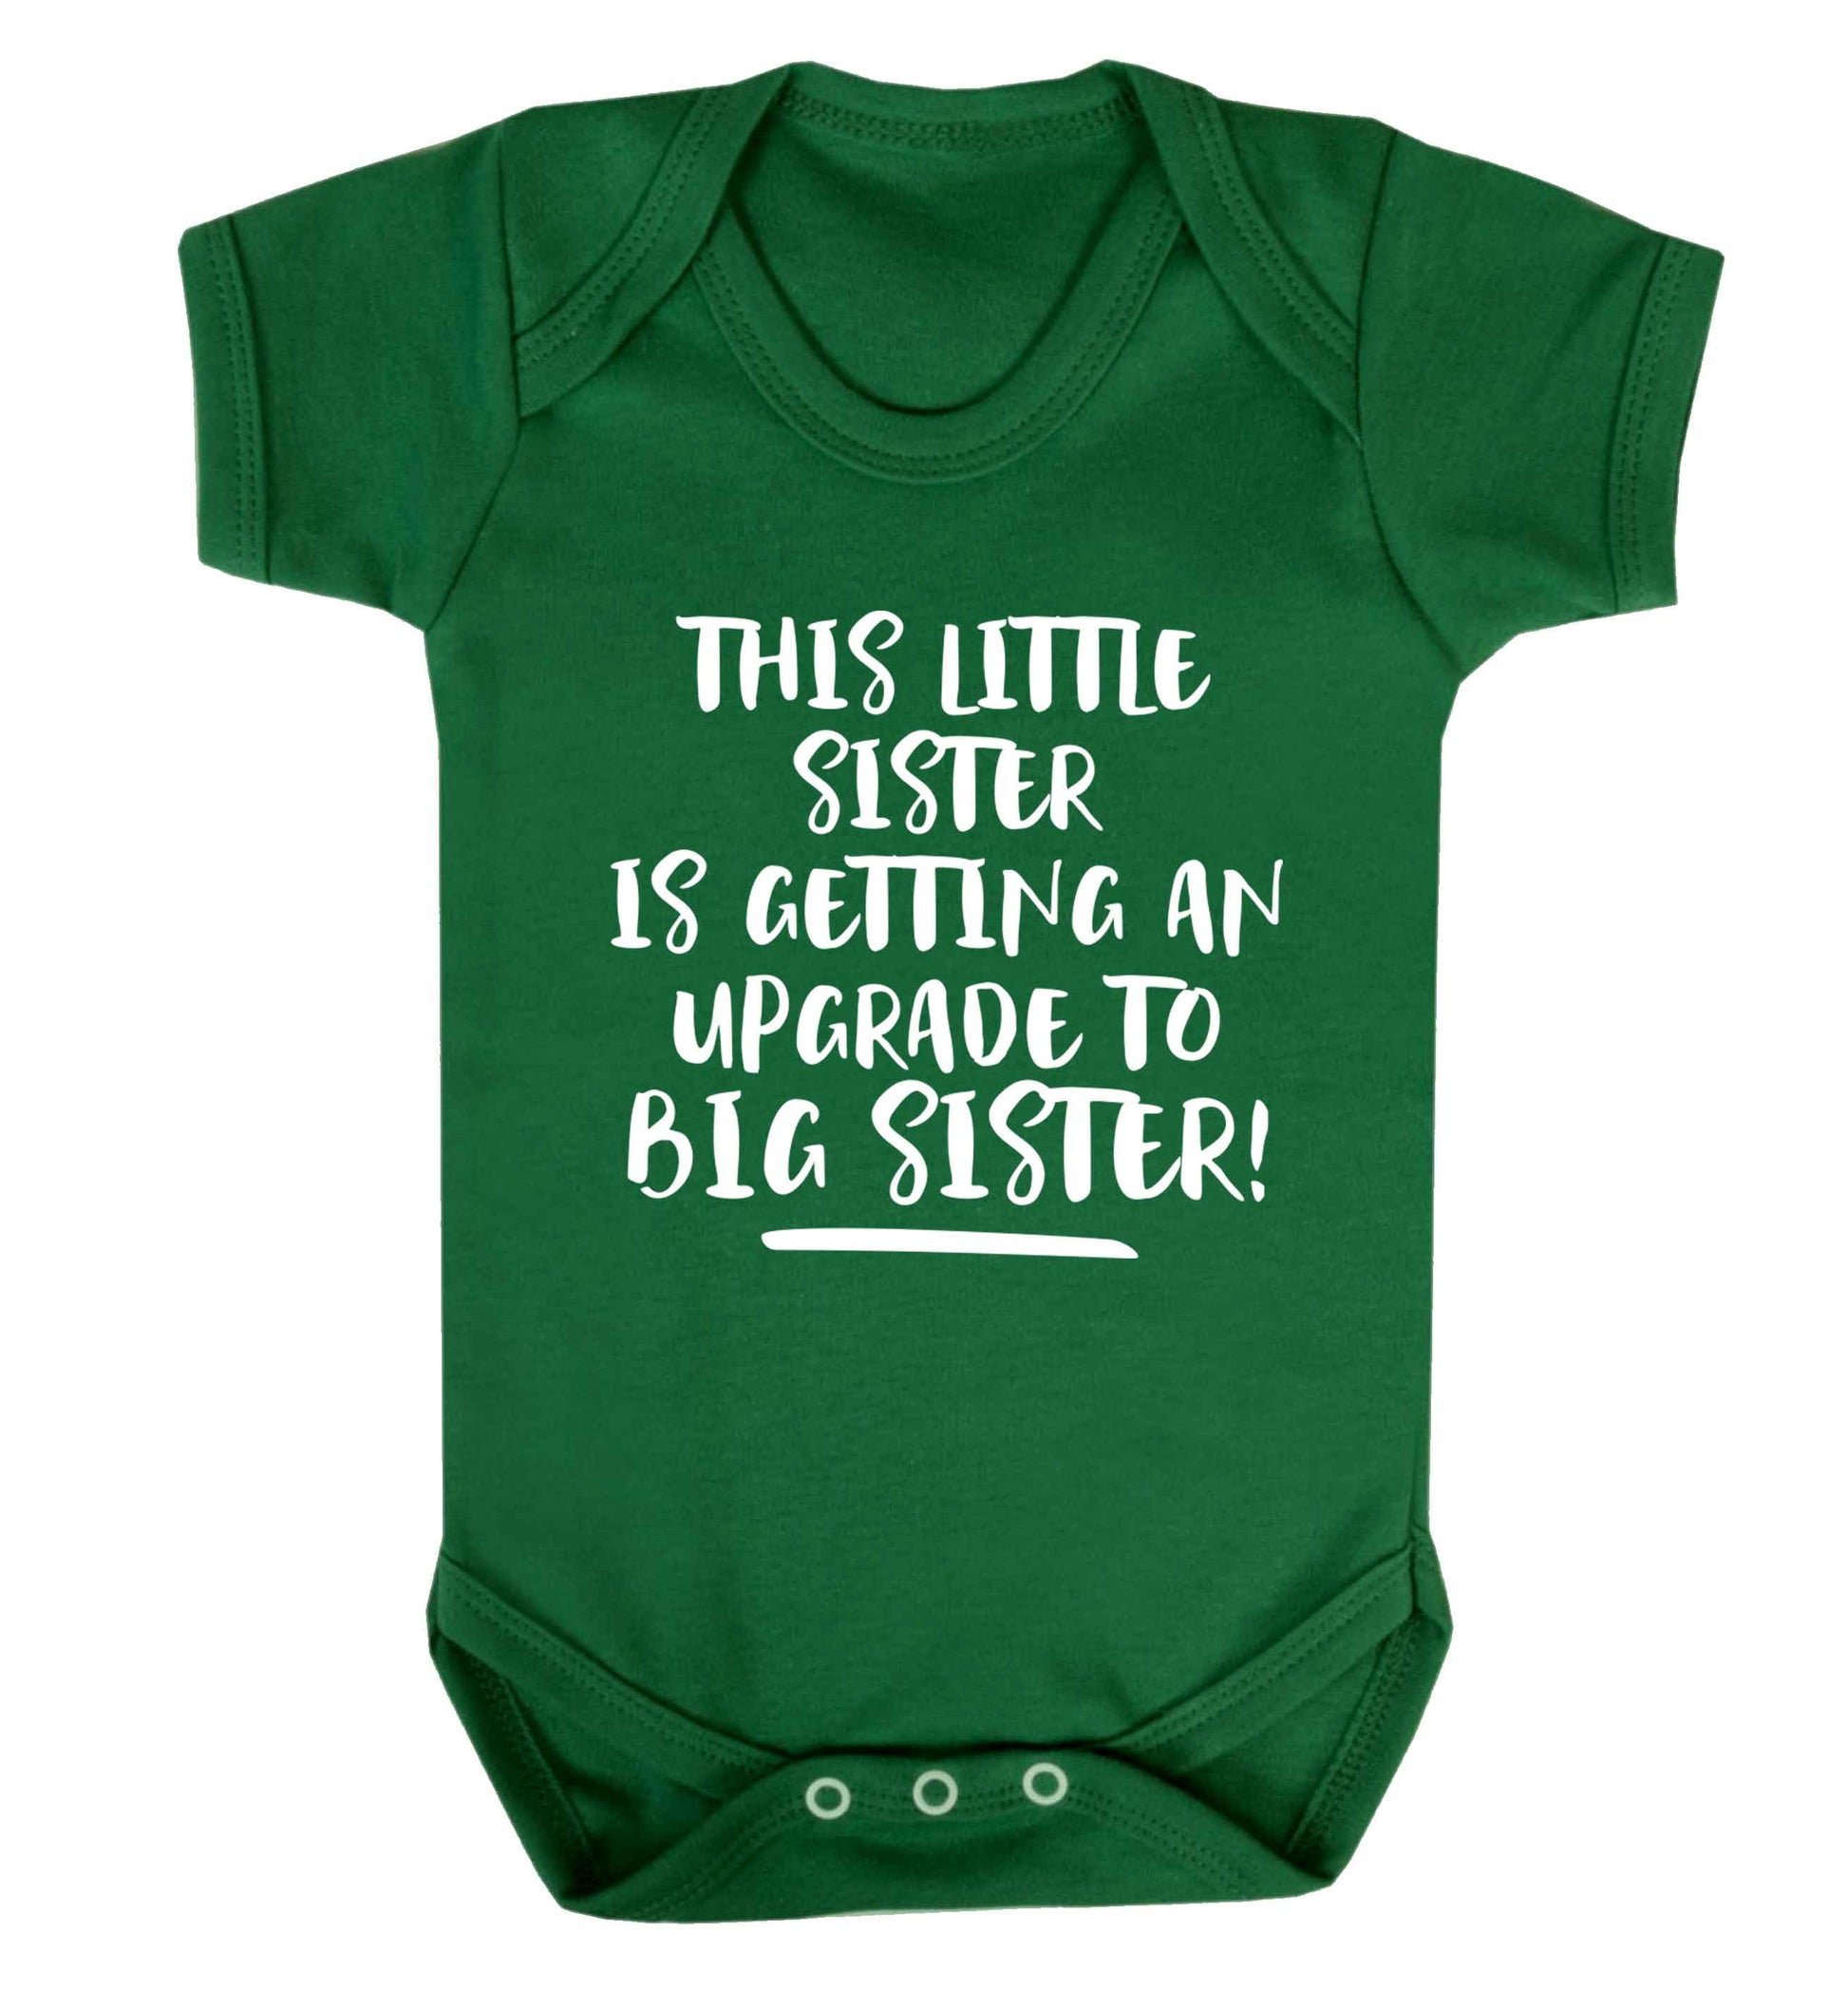 This little sister is getting an upgrade to big sister! Baby Vest green 18-24 months